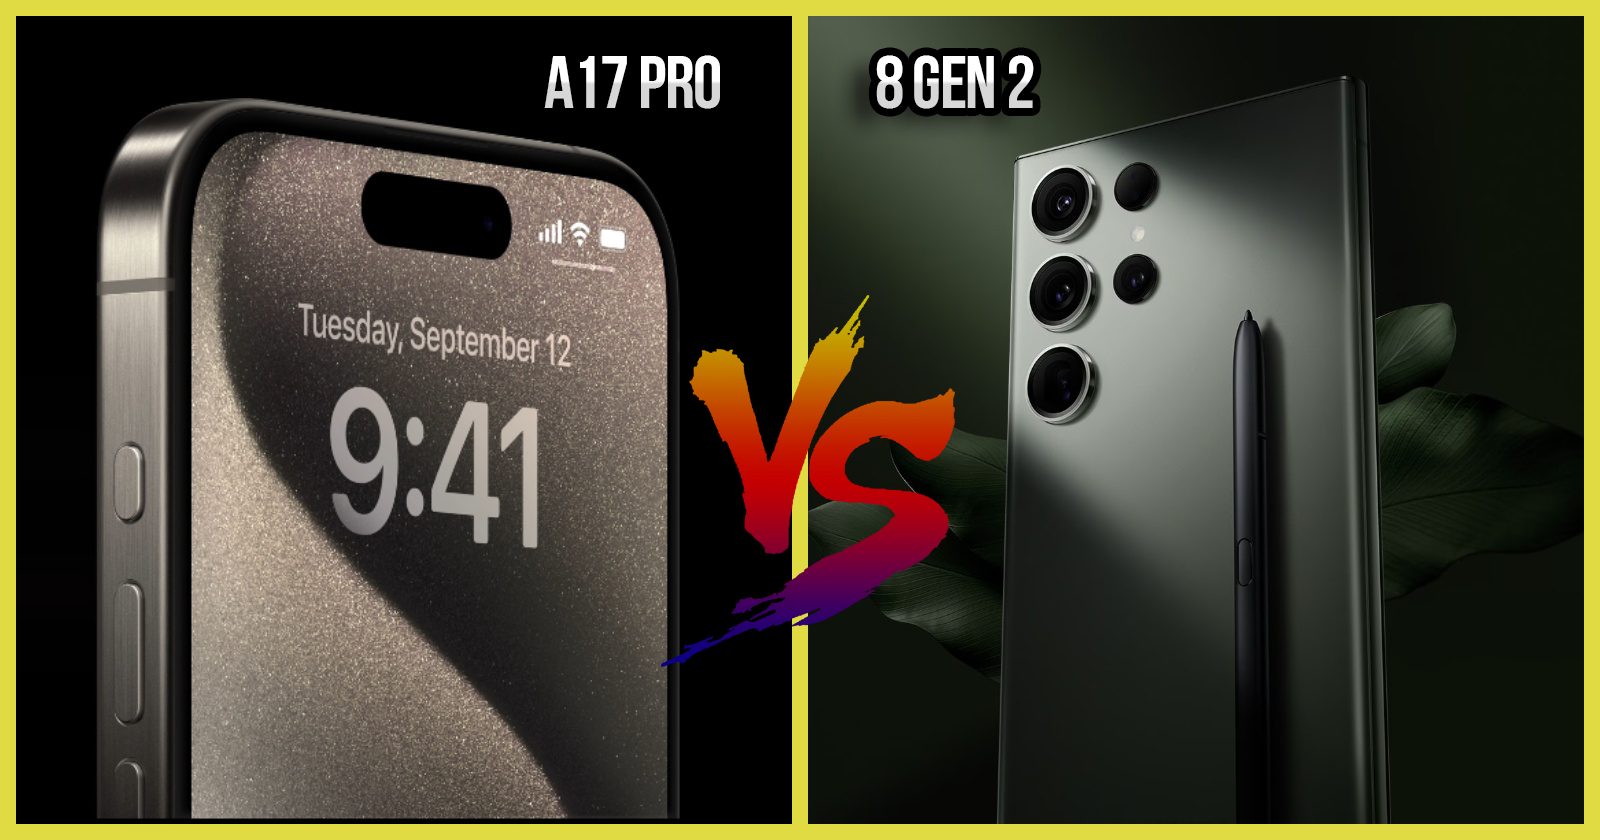 iOS vs Android: Apple A17 Pro and Snapdragon 8 Gen 2 comparison!